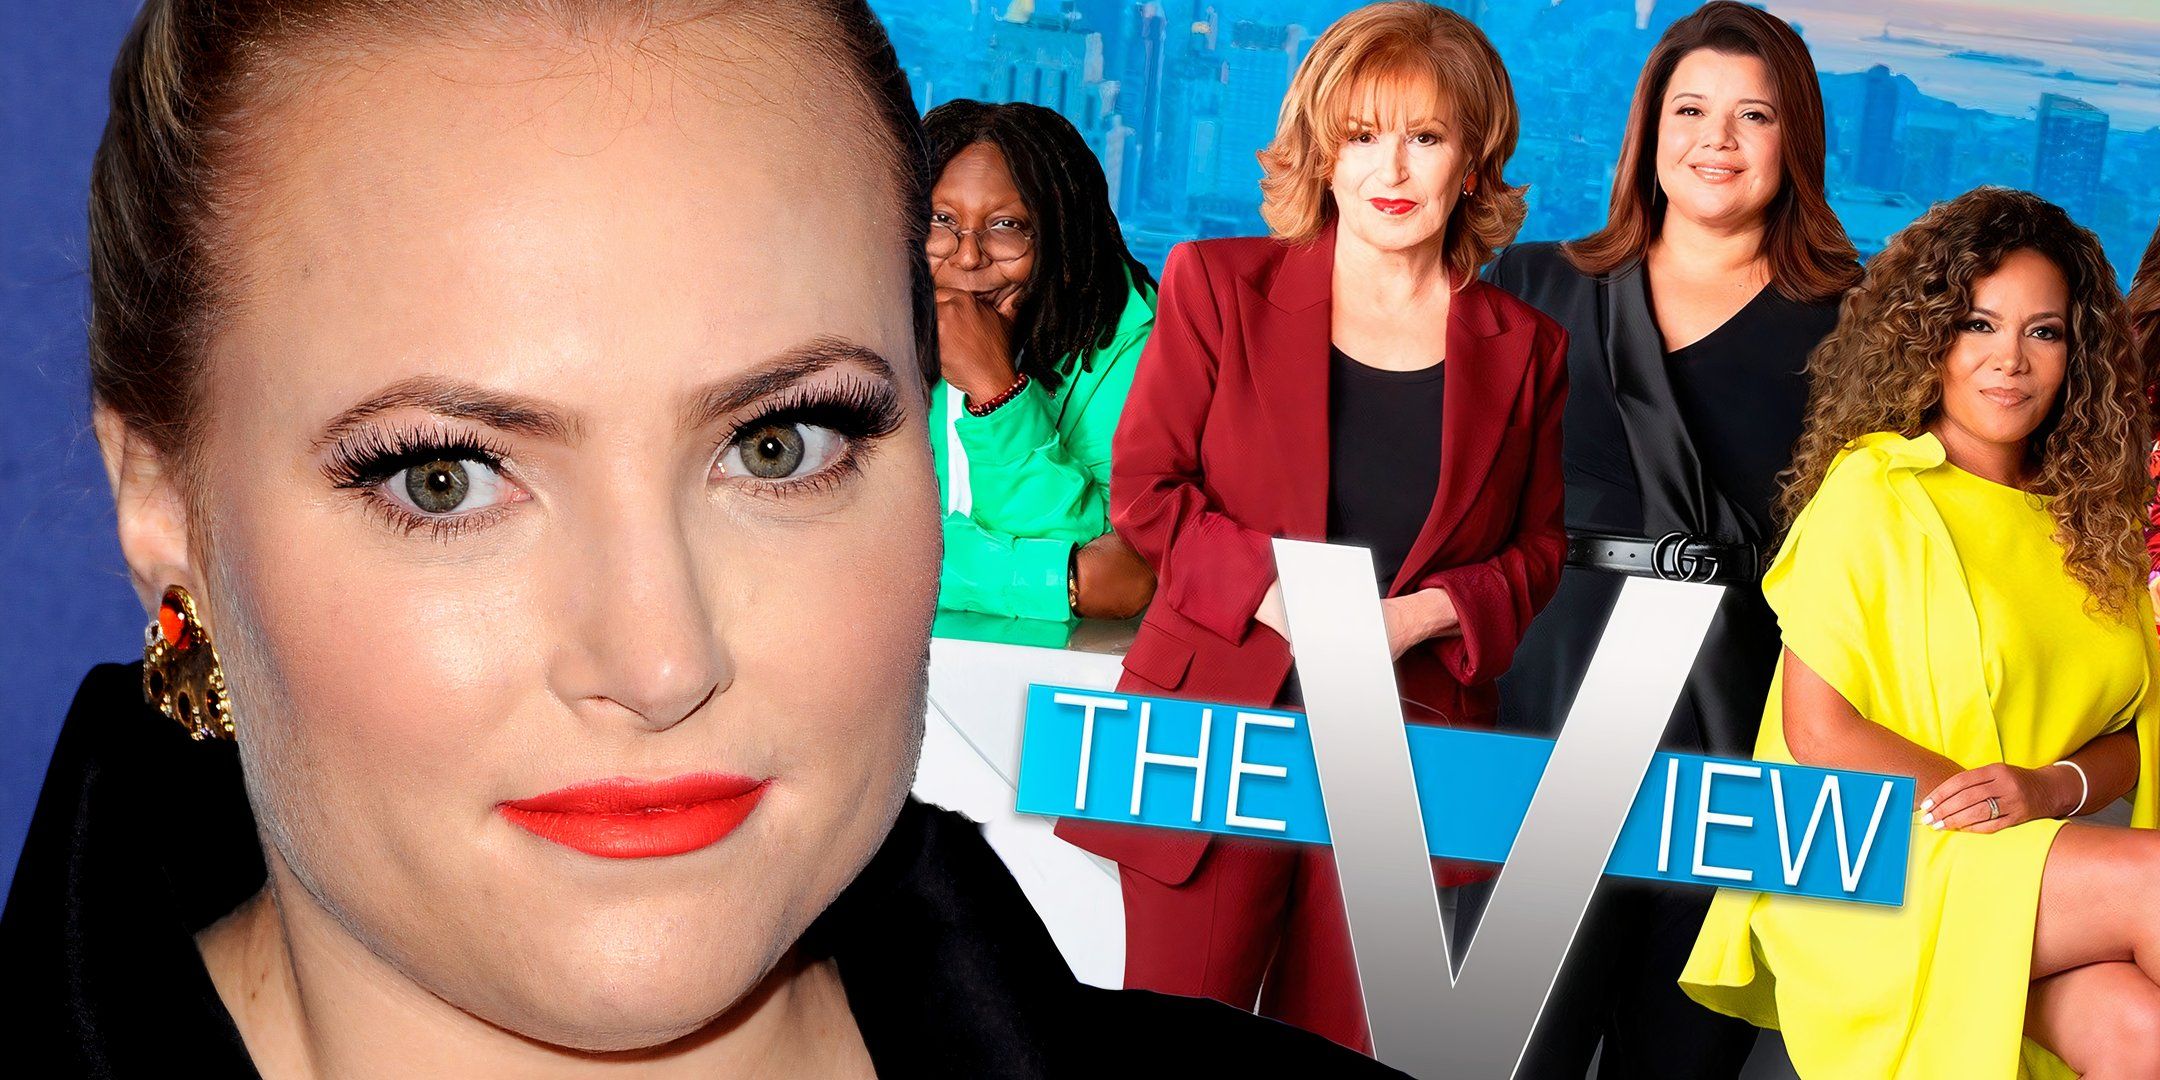 Meghan McCain and the hosts of The View